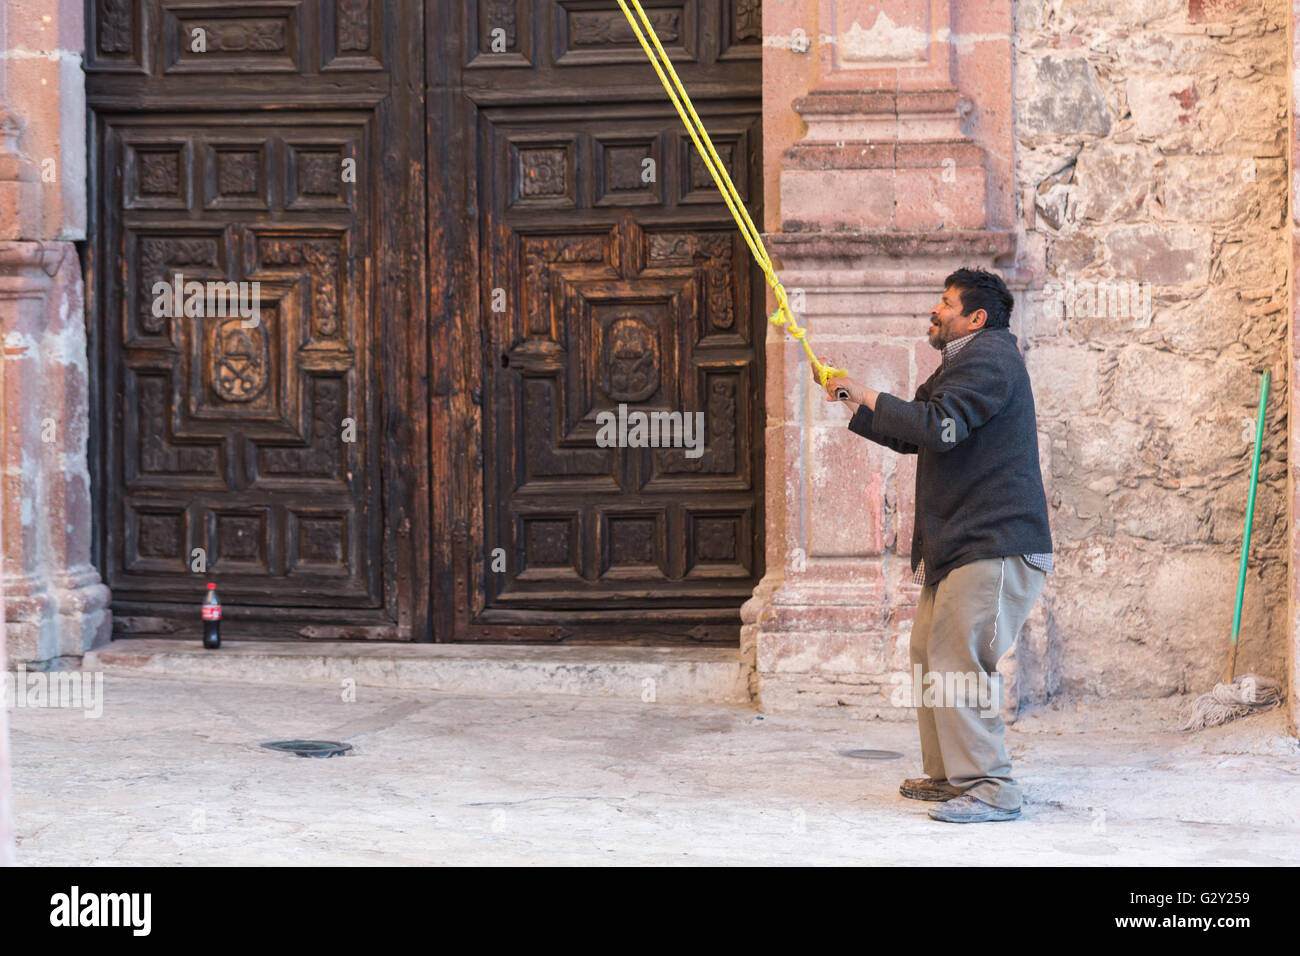 The bell ringer of the Parroquia de San Miguel Arcangel church pulls the rope to ring the bells in Jardin Square in San Miguel de Allende, Mexico. Stock Photo